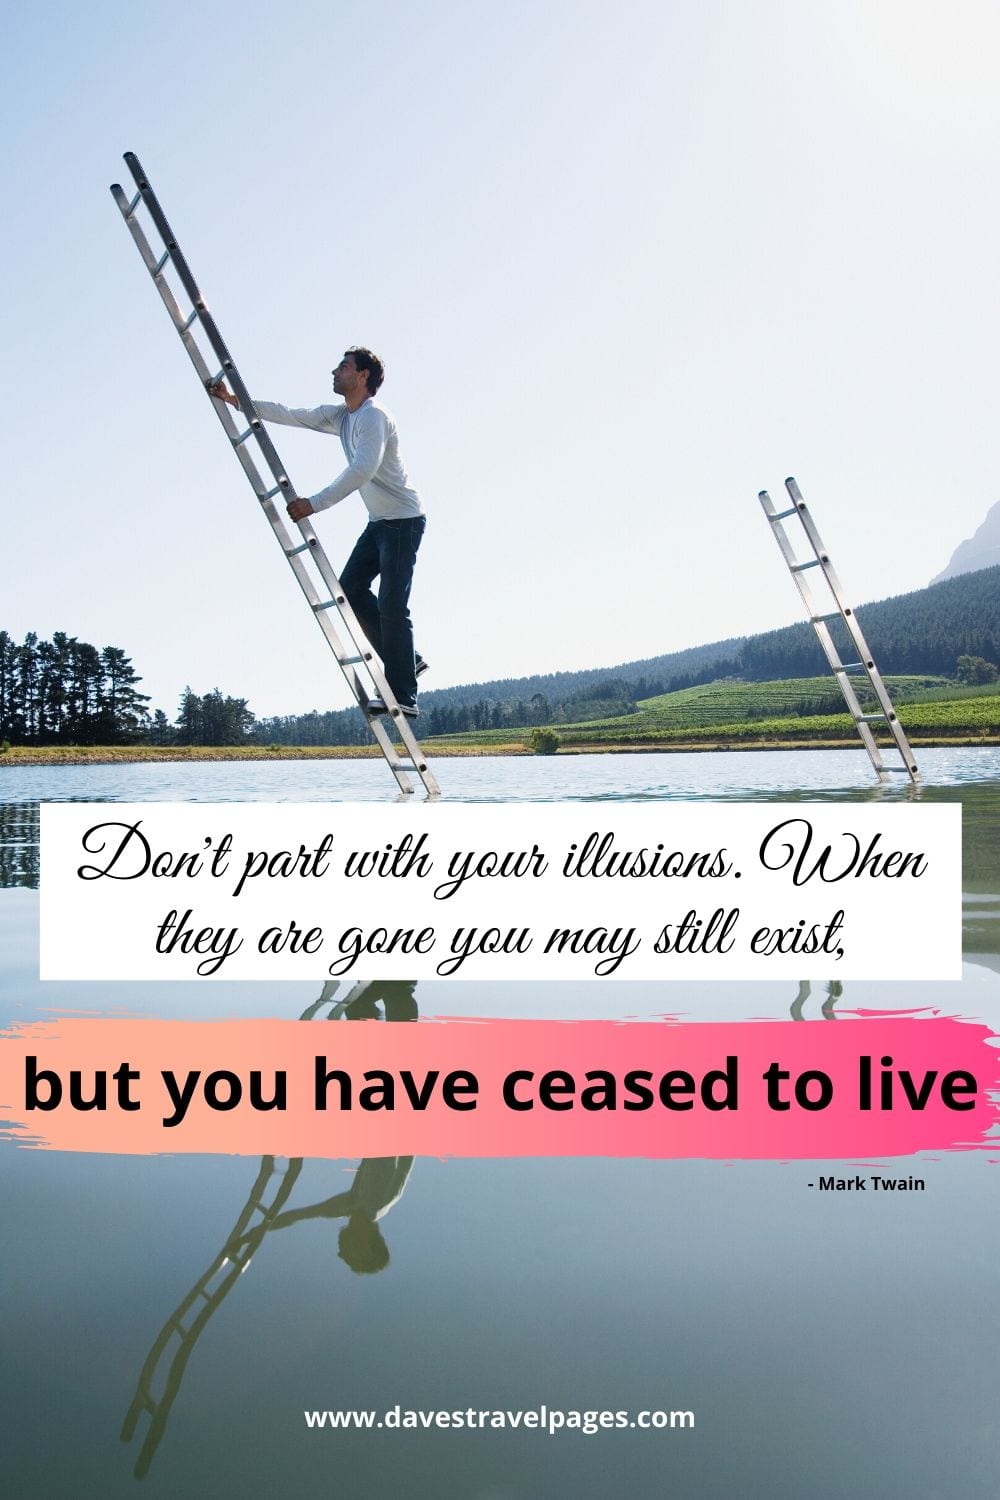 “Don't part with your illusions. When they are gone you may still exist, but you have ceased to live.” - Mark Twain quotations